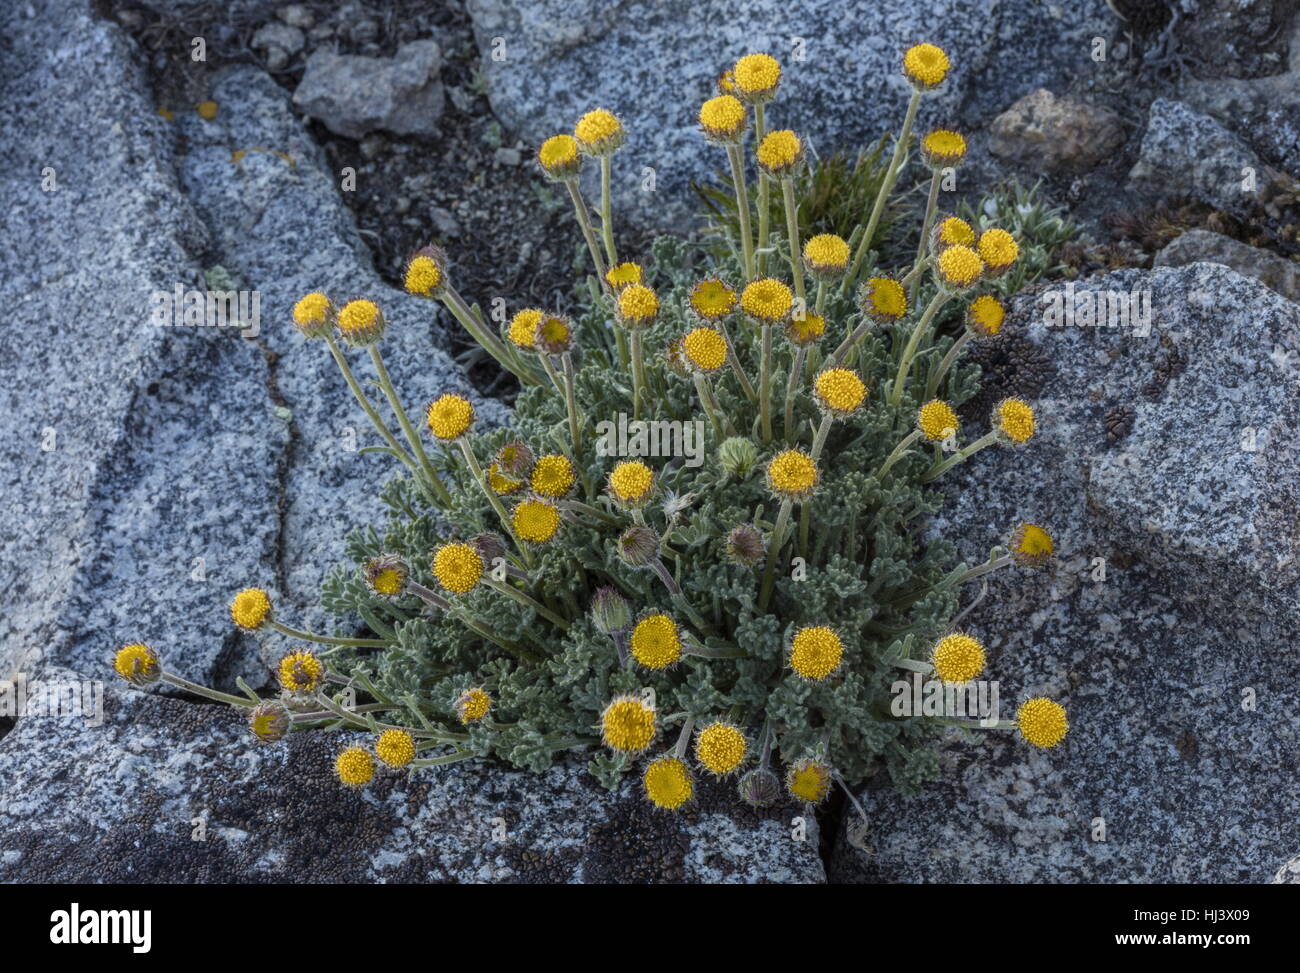 Rayless form of Cut leaved daisy, Erigeron compositus, in flower in high altitude fell-field, Plateau, Sierra Nevada. Stock Photo